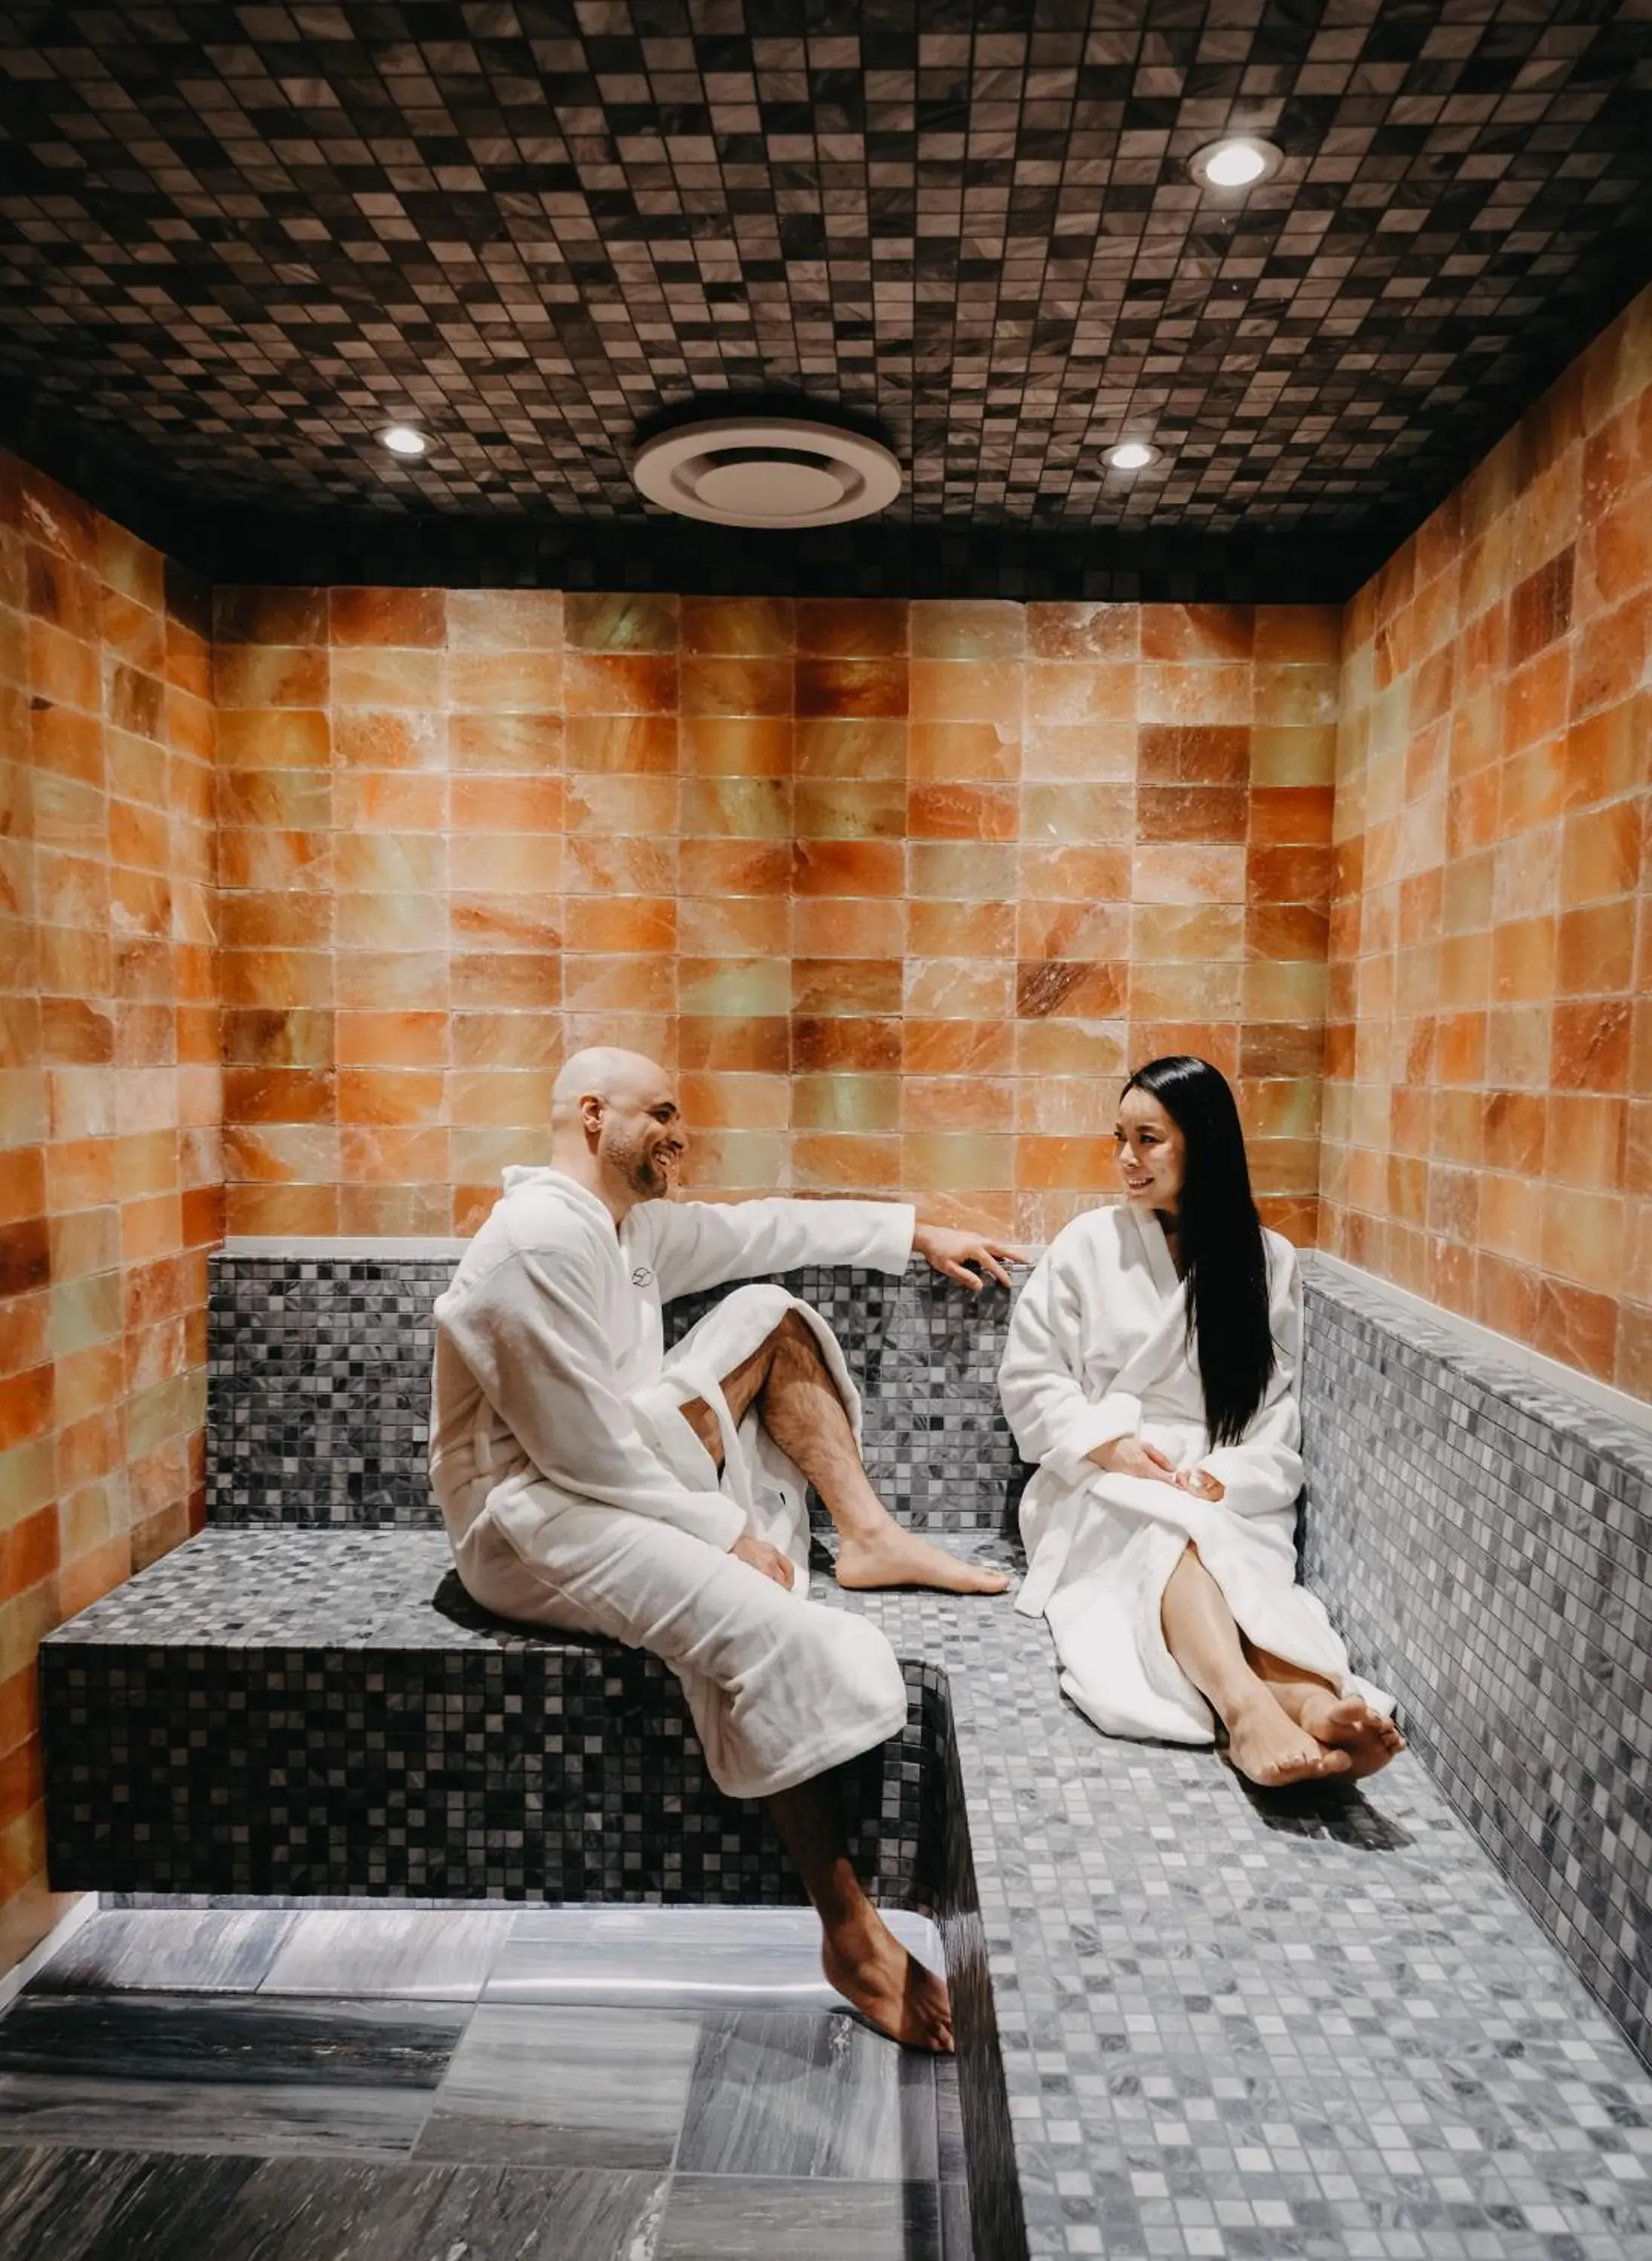 Spa and wellness centre/facilities in Fairmont Century Plaza Los Angeles